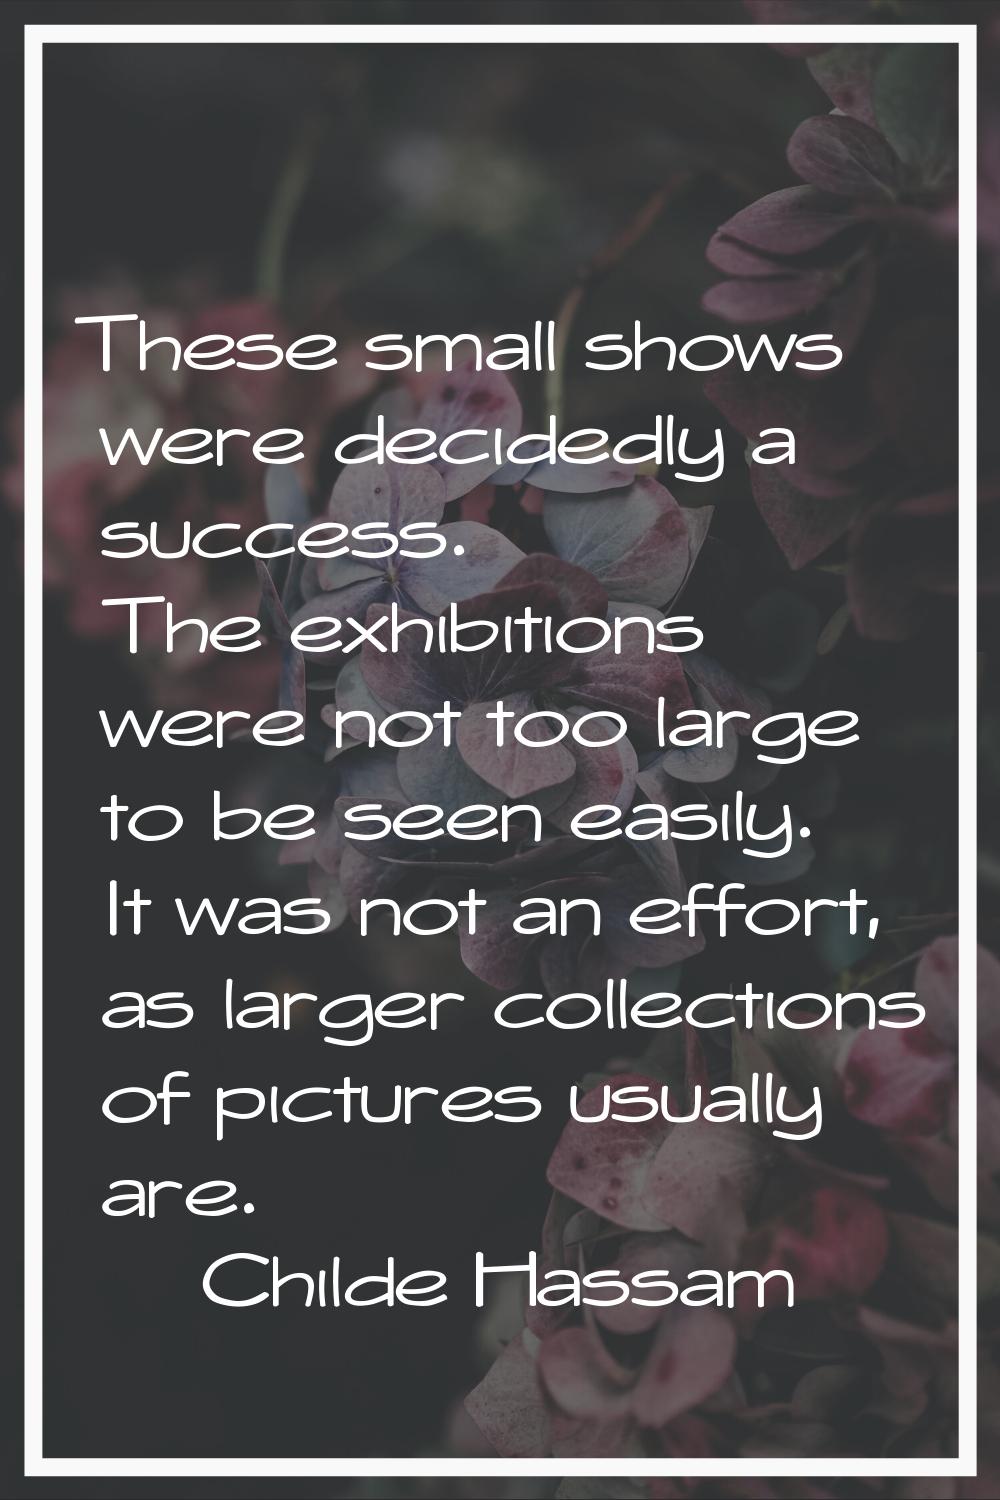 These small shows were decidedly a success. The exhibitions were not too large to be seen easily. I